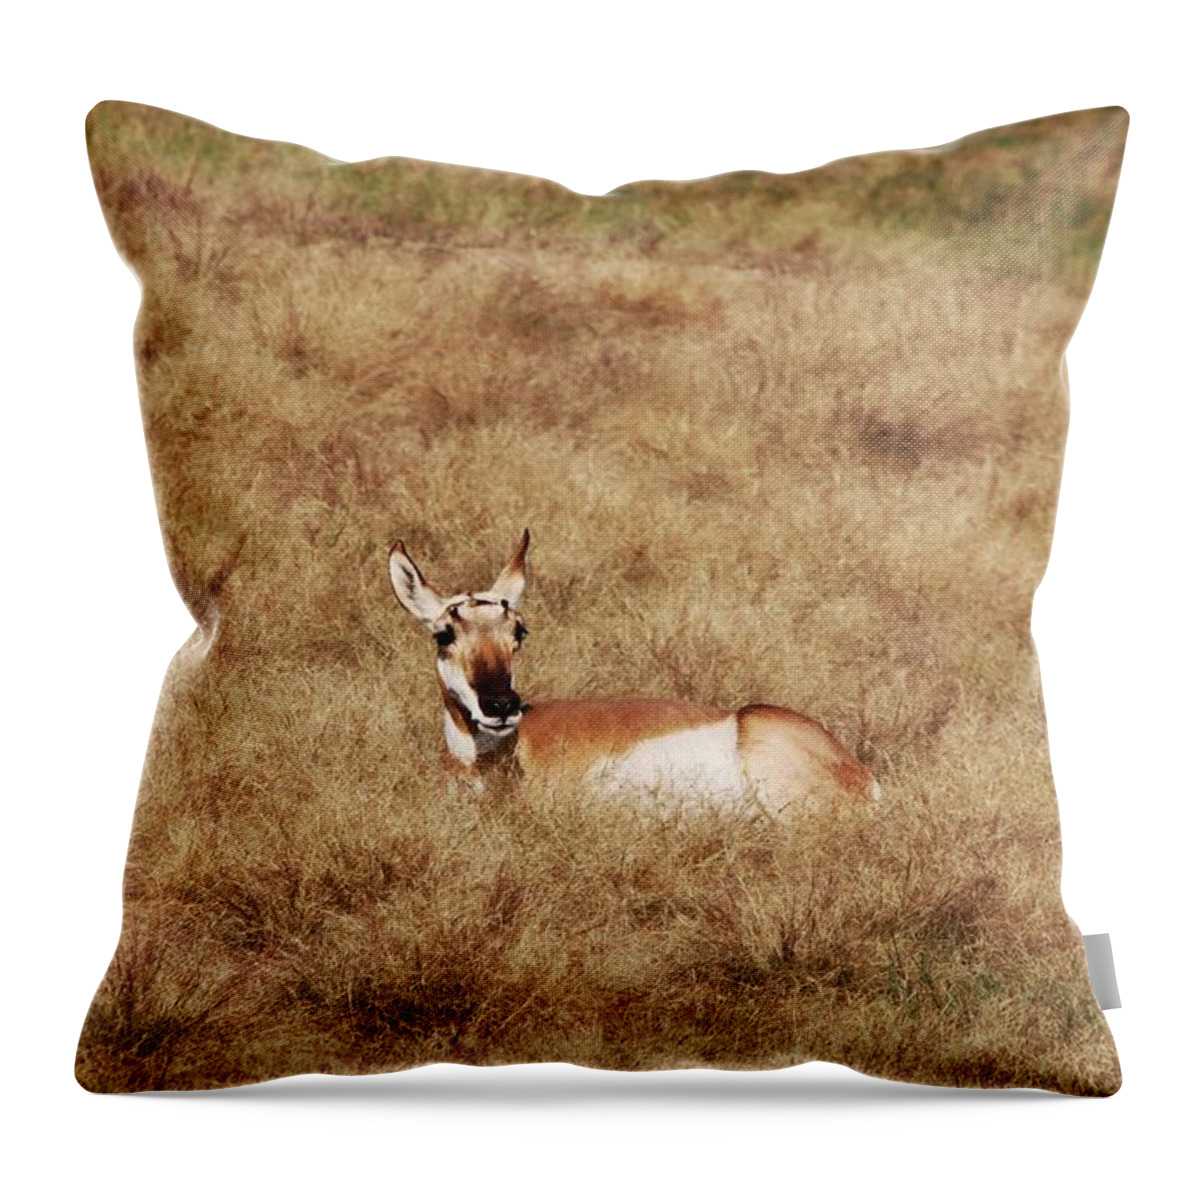 Pronghorn Antelope At Custer State Park Throw Pillow featuring the photograph Pronghorn Antelope at Custer State Park #1 by Susan Jensen